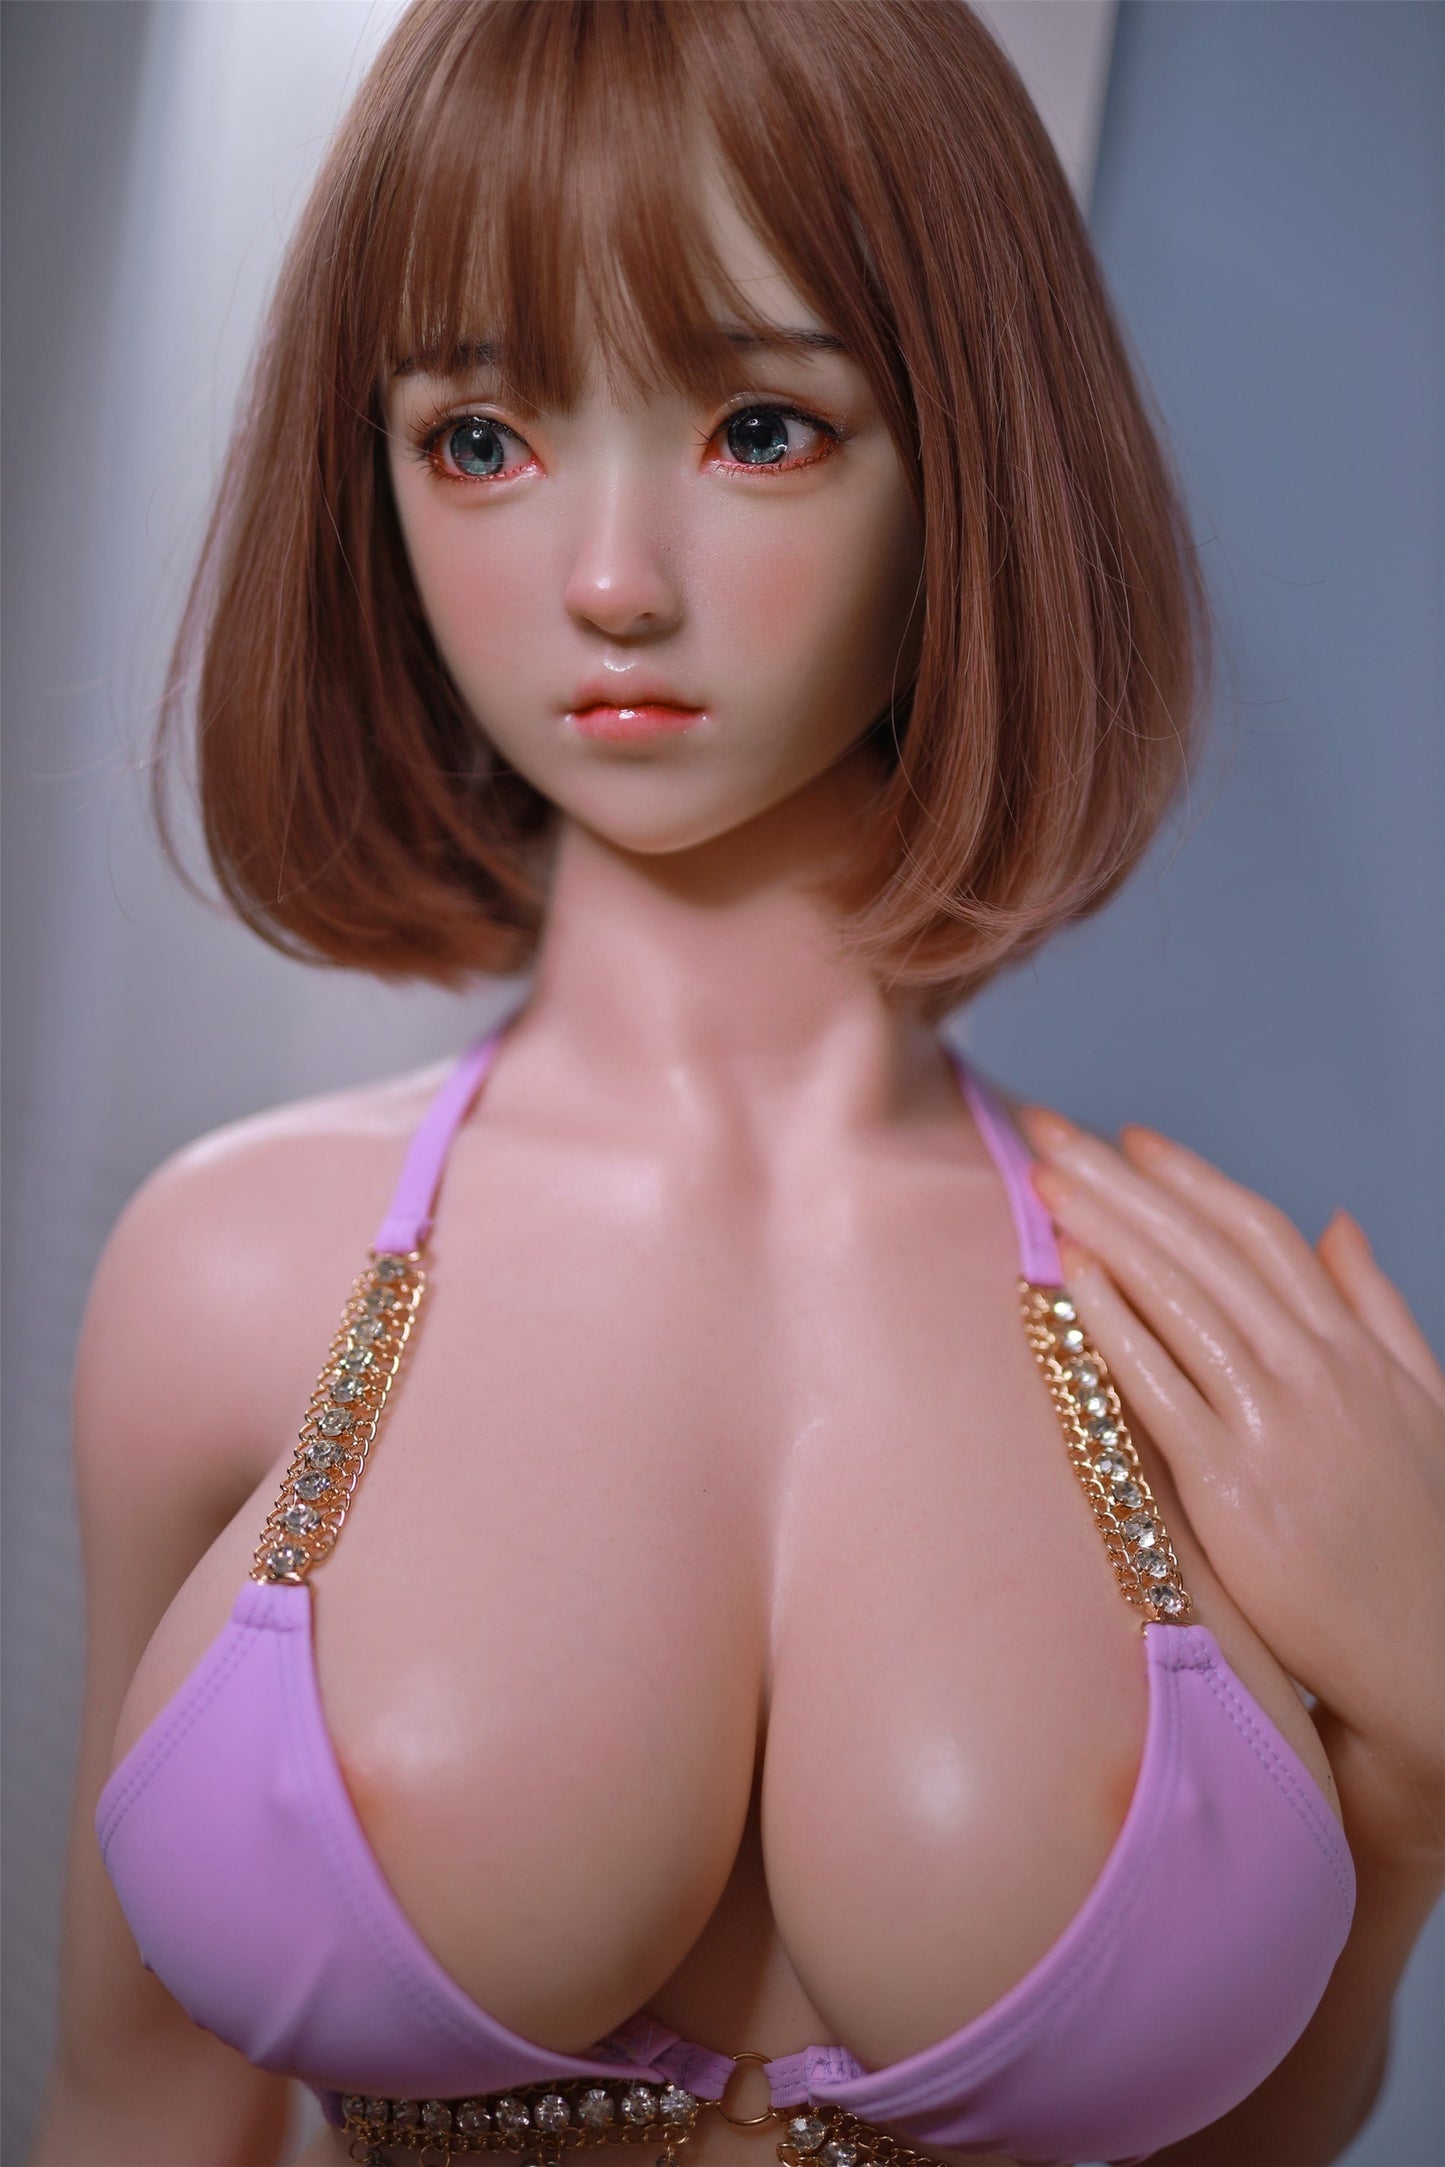 JY Doll 157cm G Cup - Head S64 - Silicone